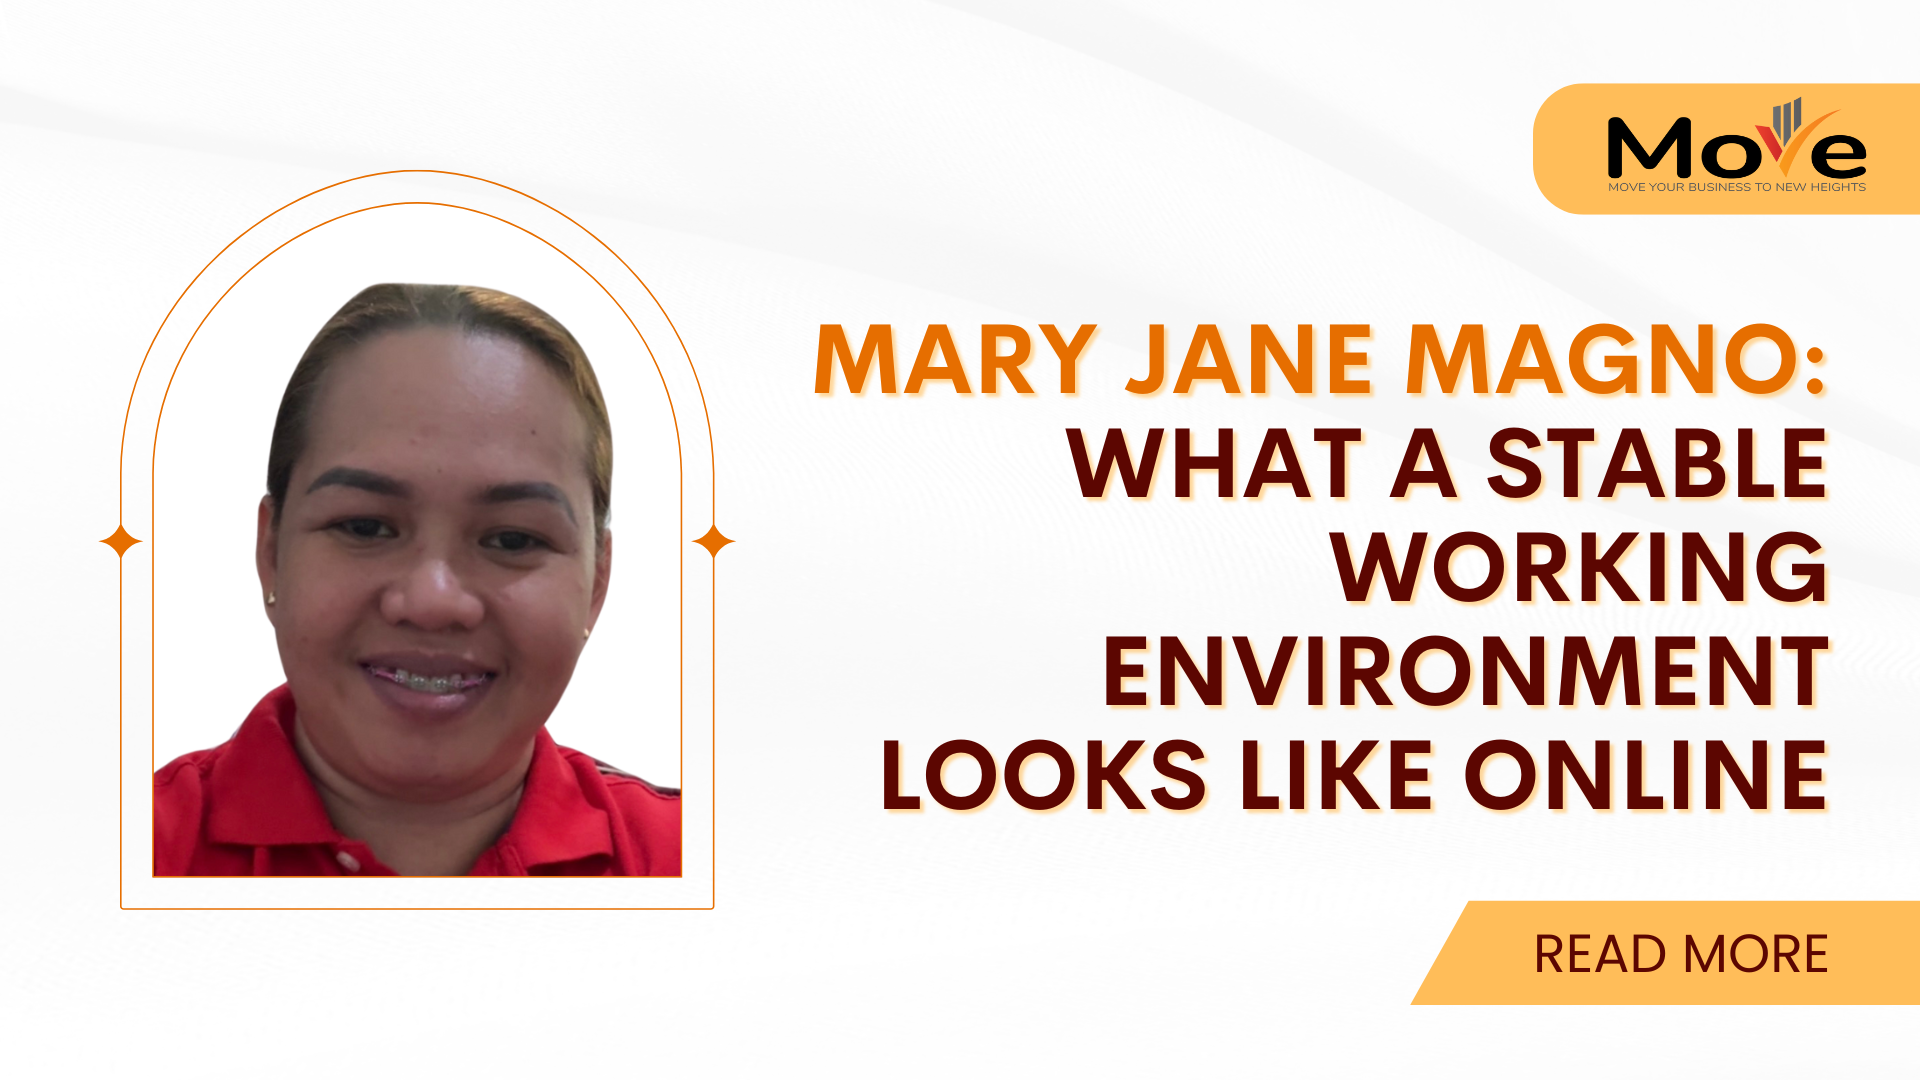 Mary Jane Magno and MOVE's Stable Working Environment Online